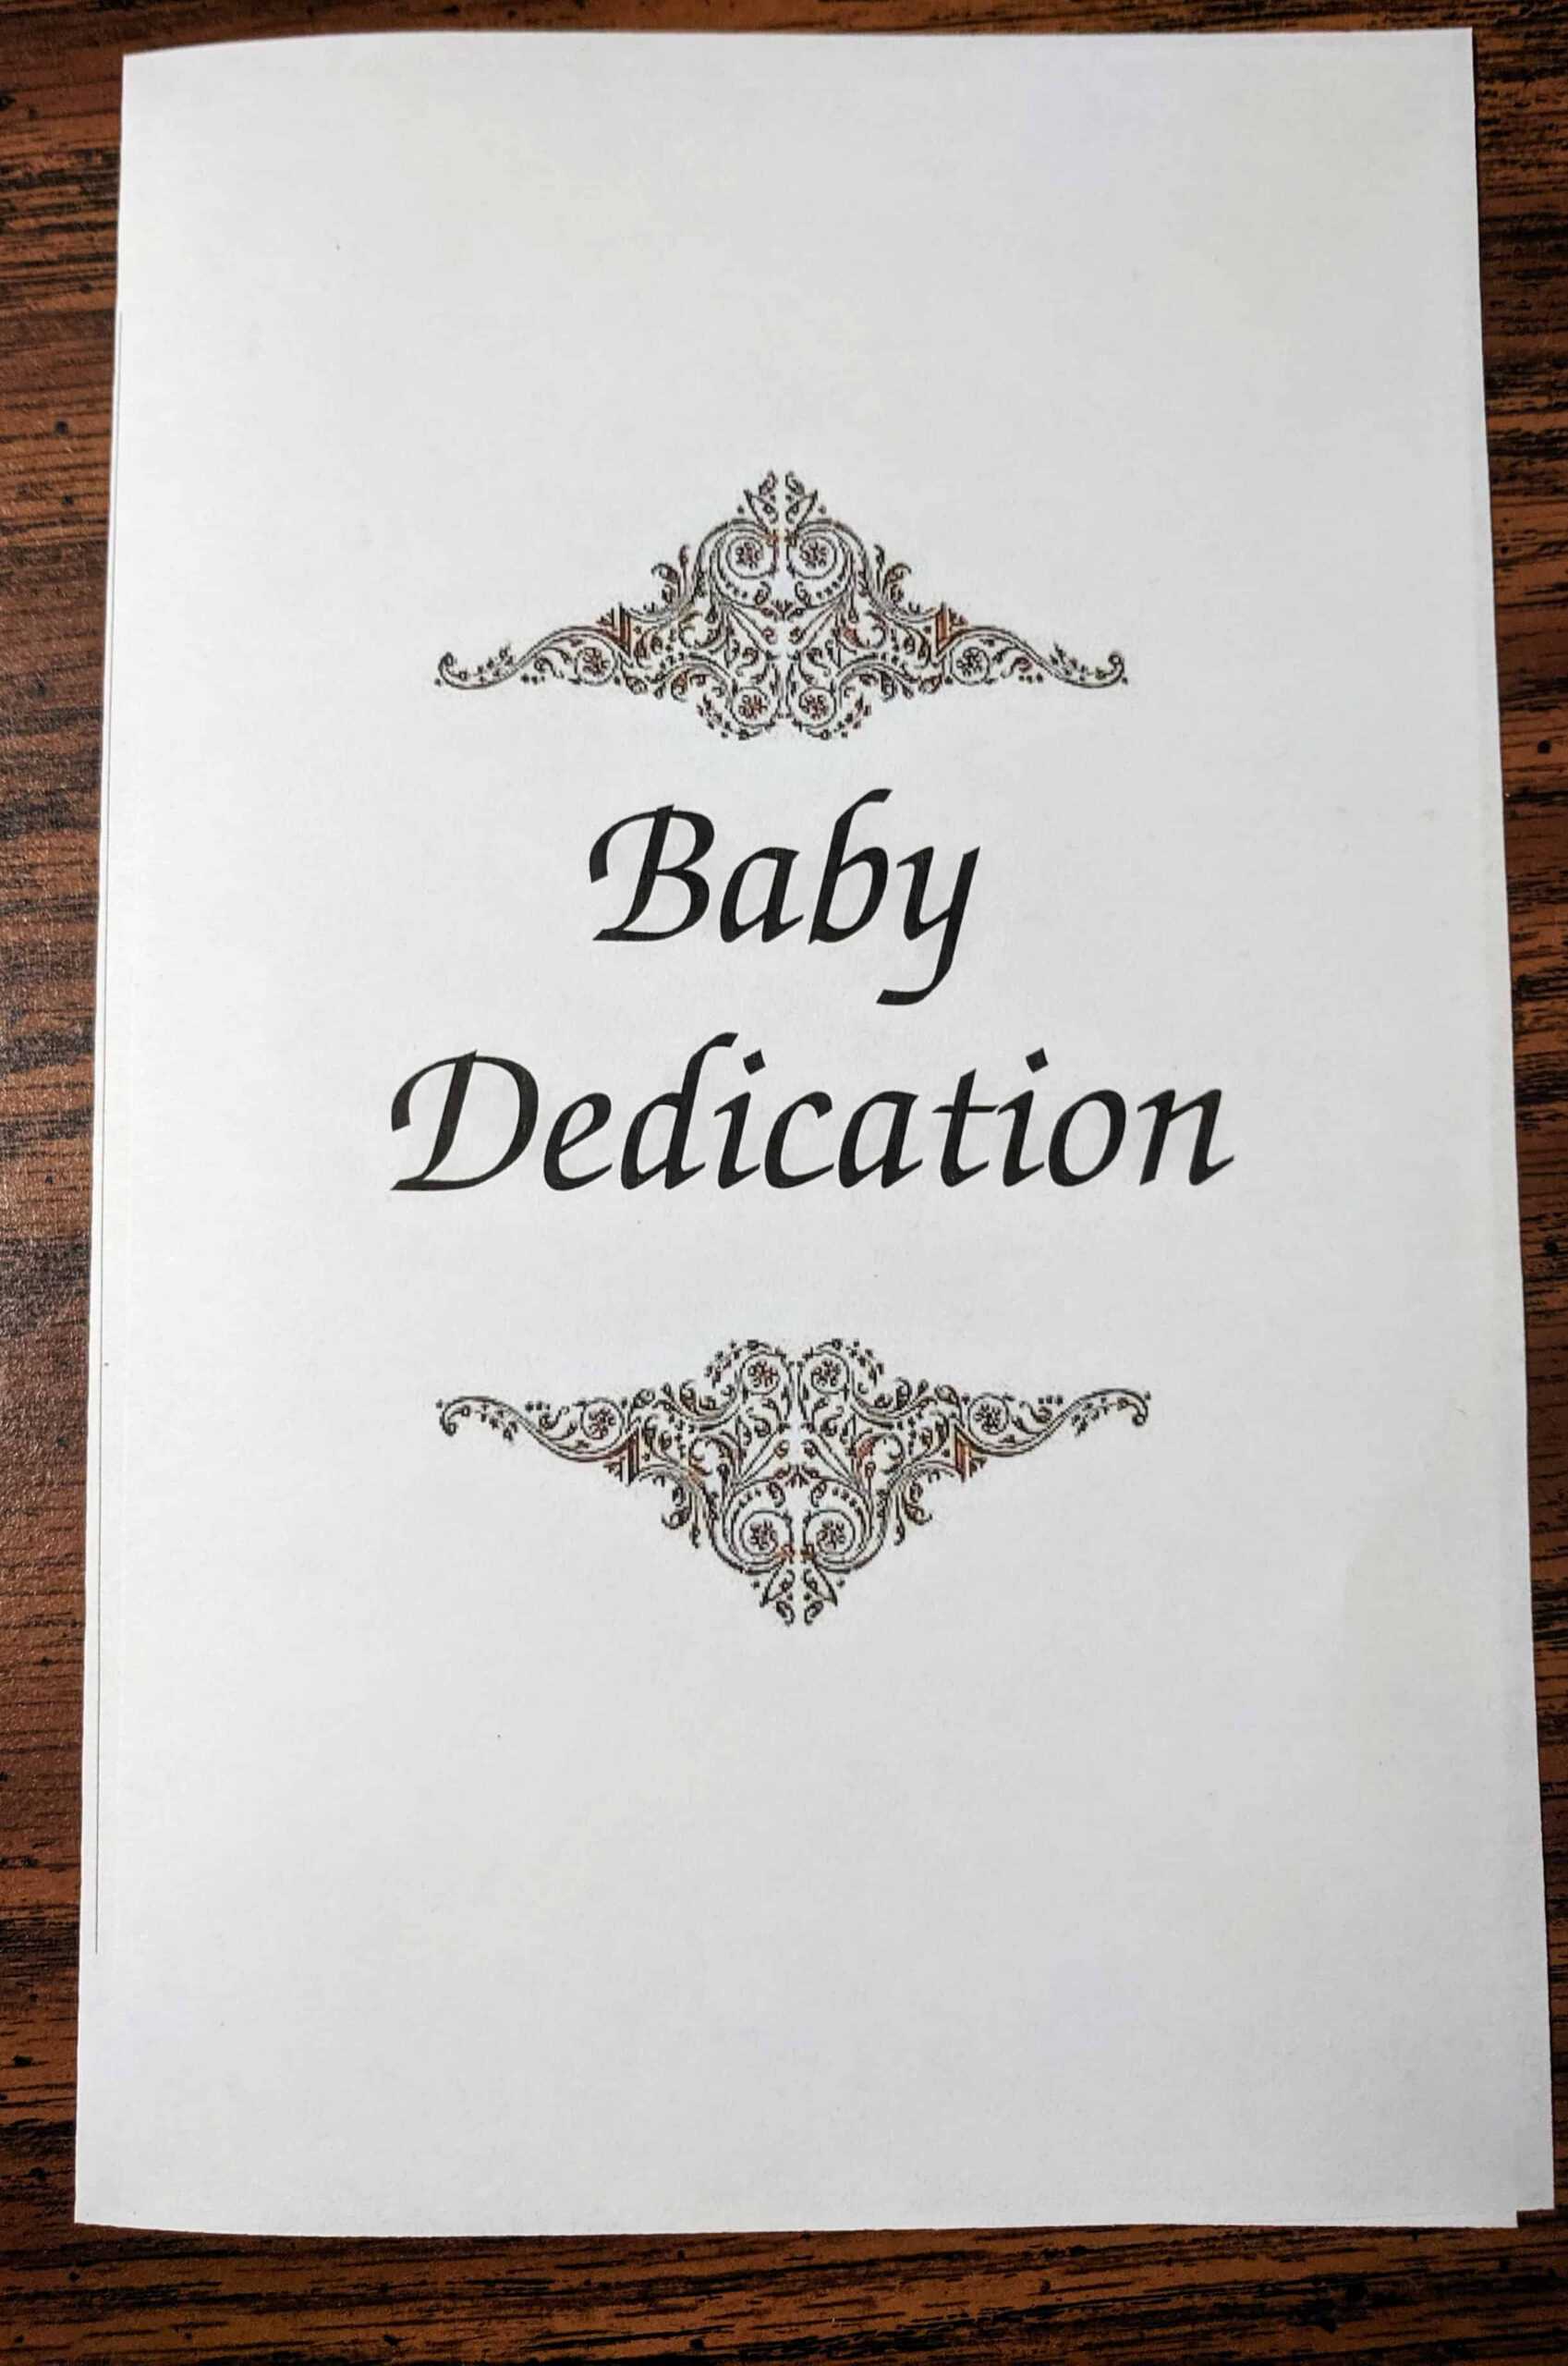 Baby Dedication" Ceremony Includes Prayer, Message, Certificate With Regard To Baby Dedication Certificate Template